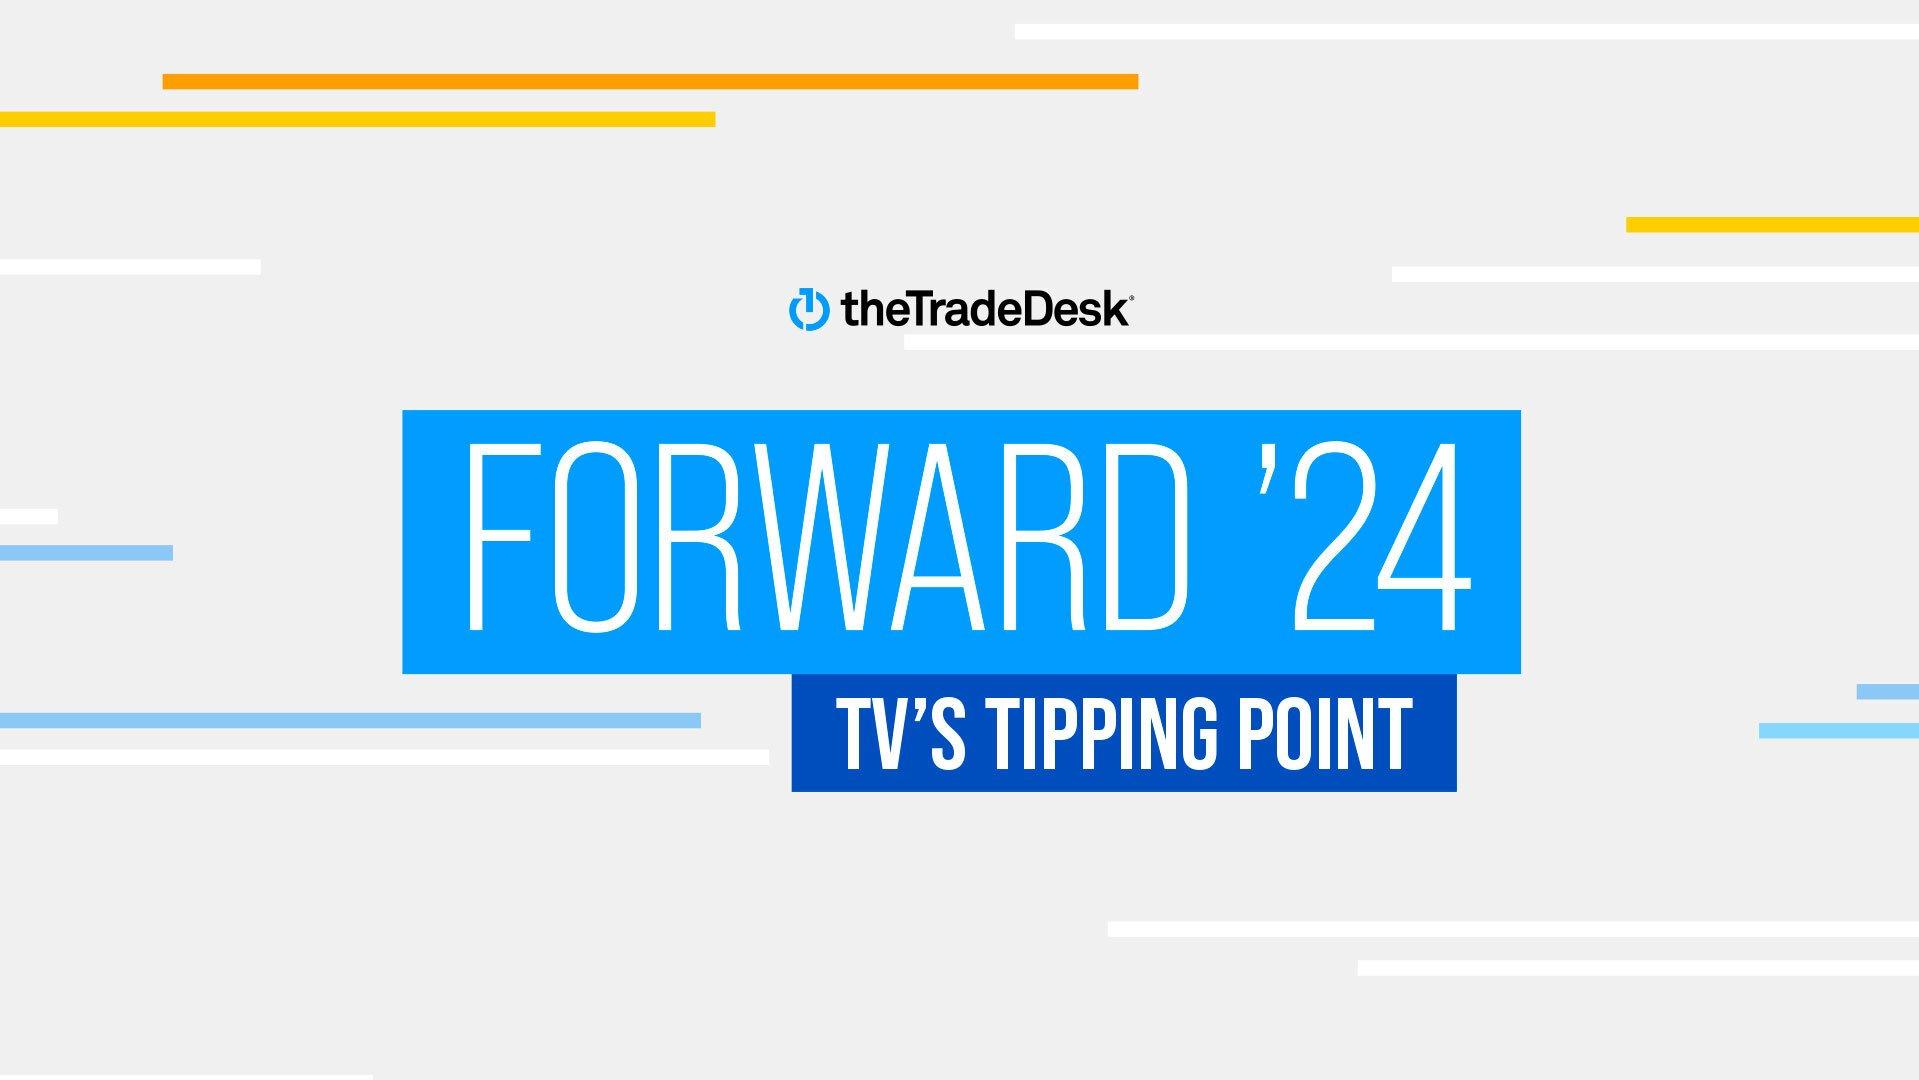 Picture of The Trade Desk logo with Forward'24 TV's Tipping Point below it.